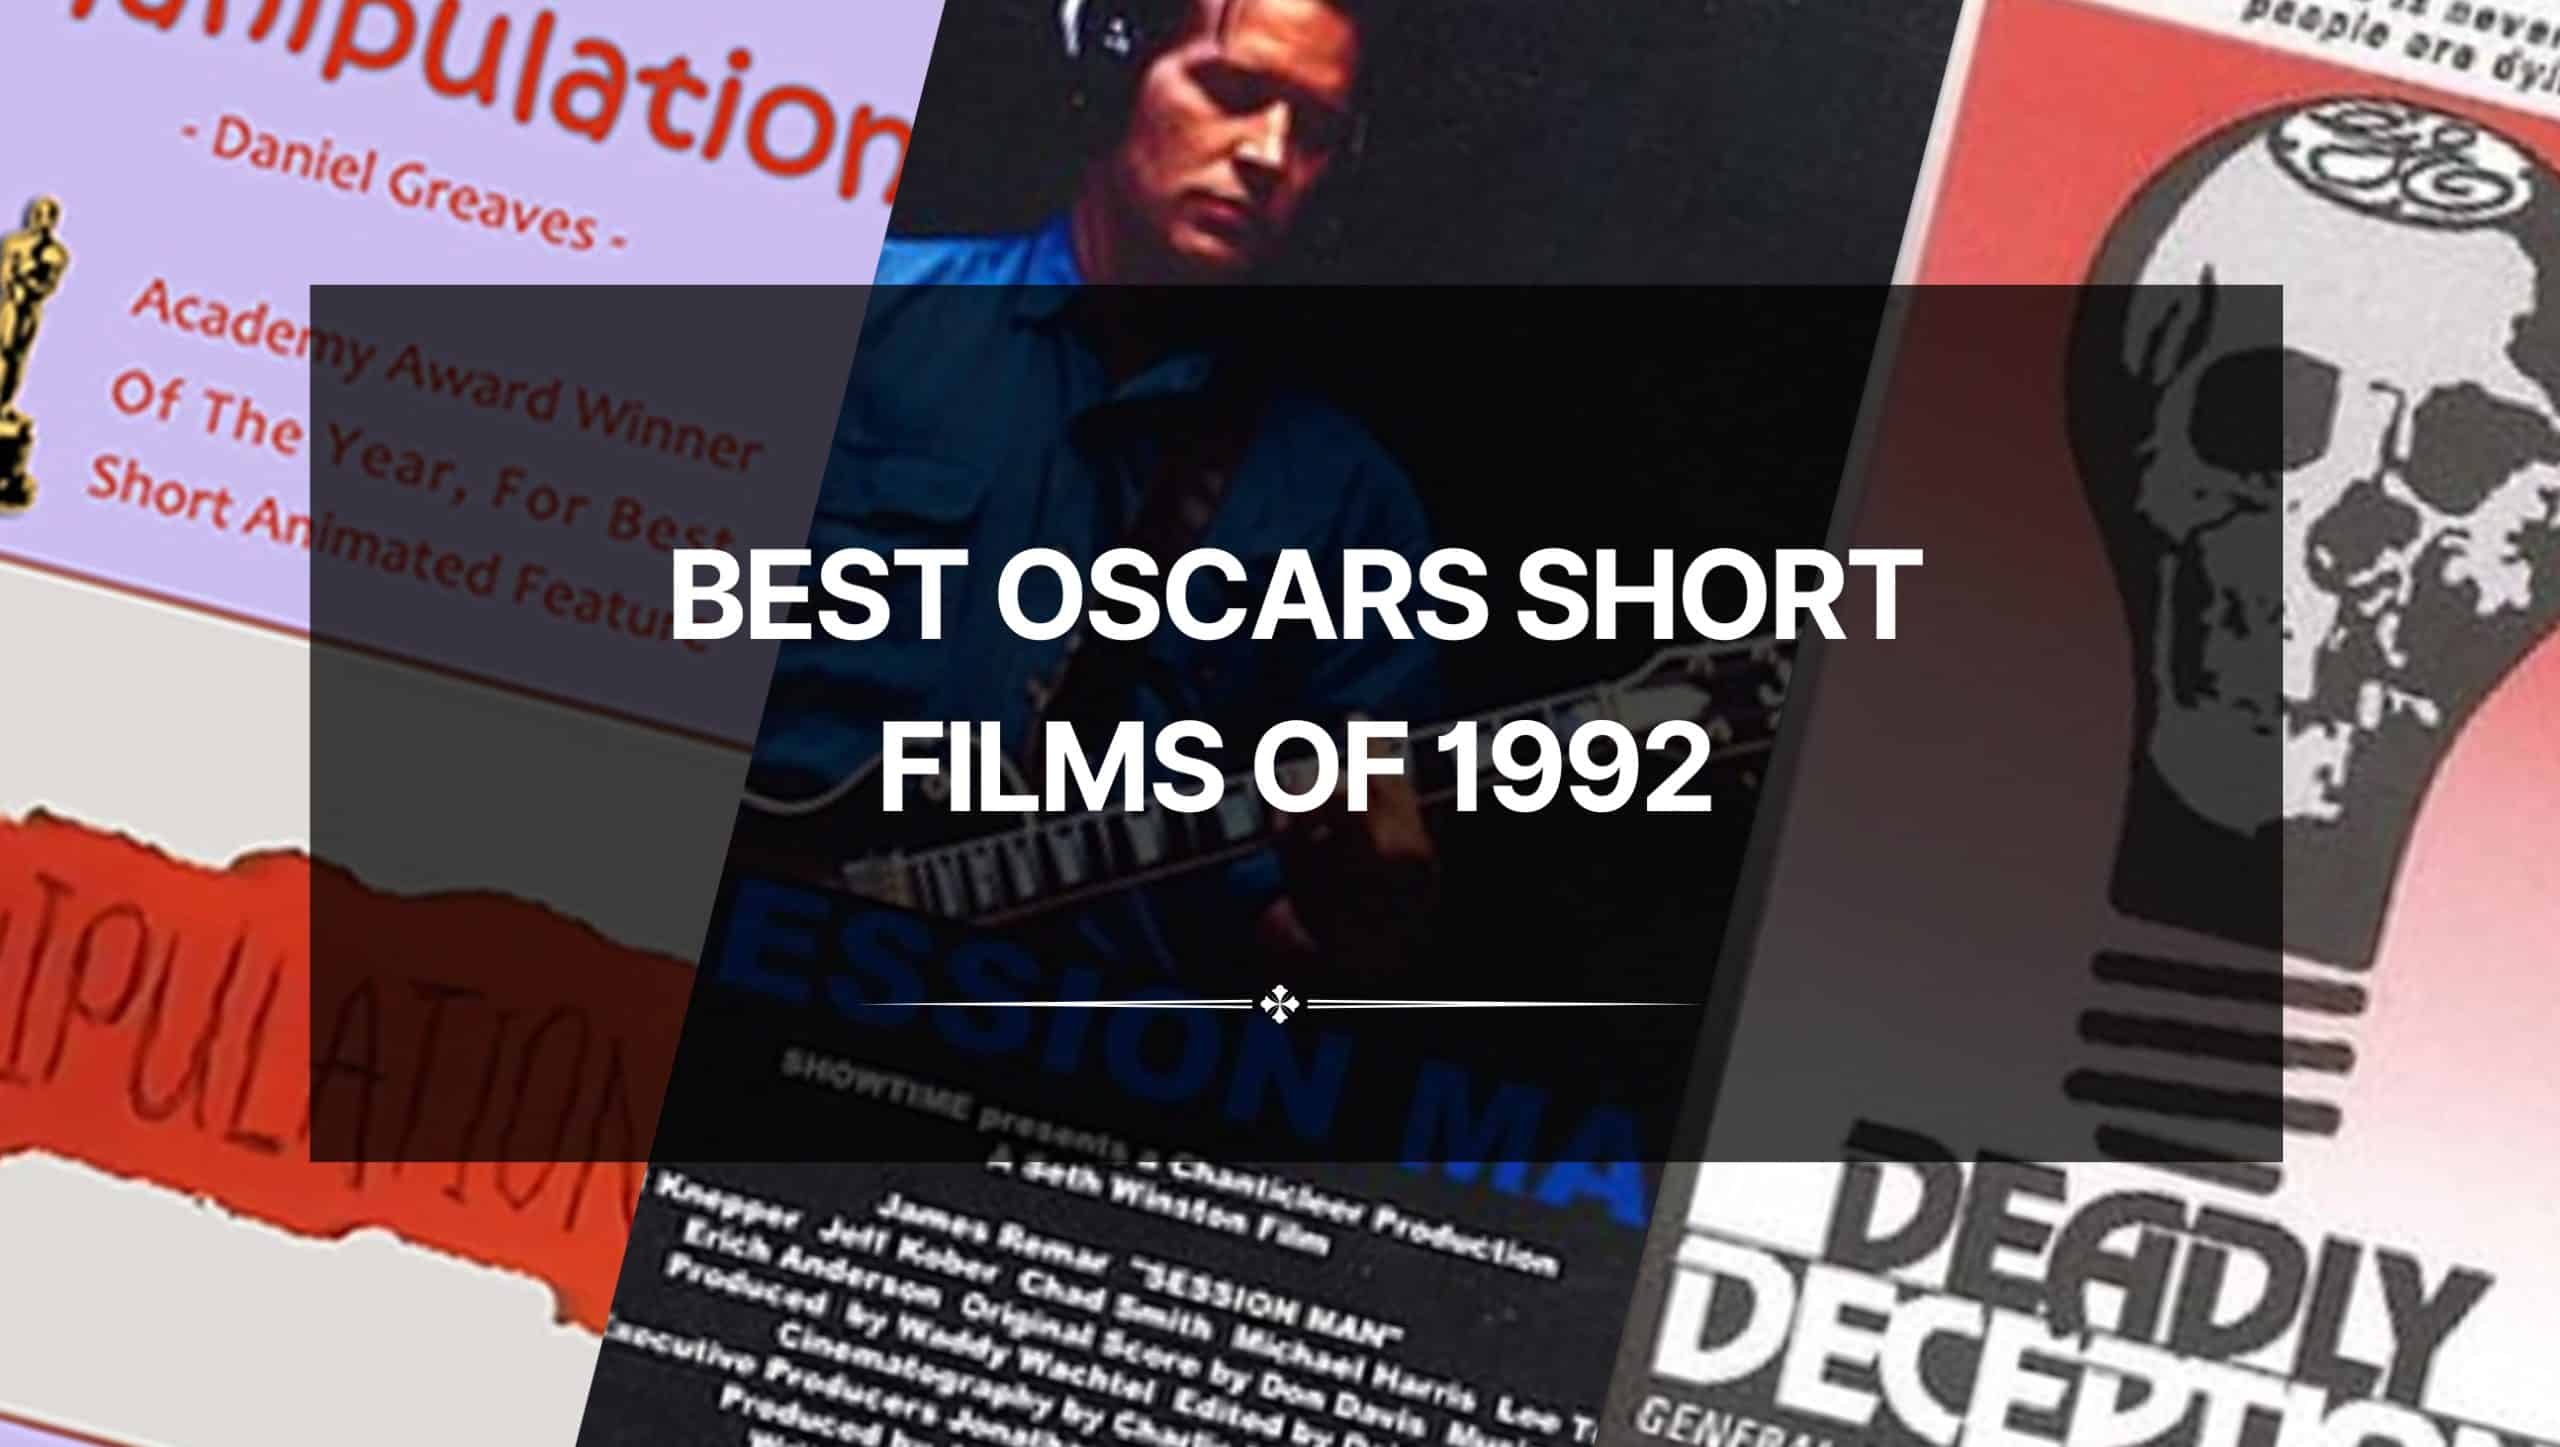 Best Oscars Short Films of 1992: The Stand-Out Nominees